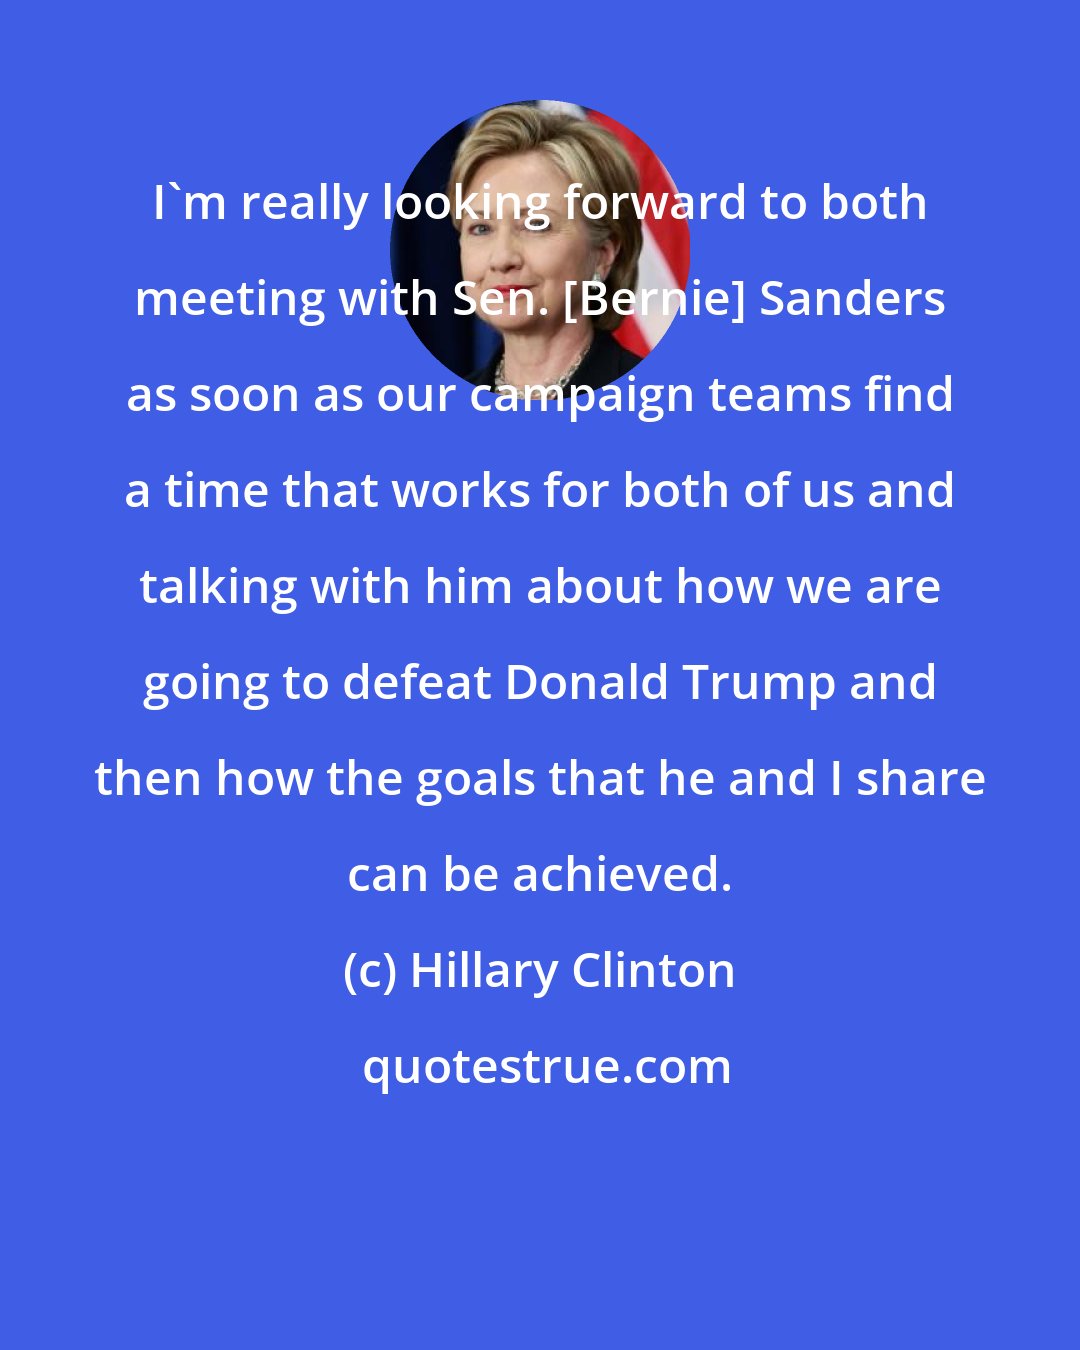 Hillary Clinton: I'm really looking forward to both meeting with Sen. [Bernie] Sanders as soon as our campaign teams find a time that works for both of us and talking with him about how we are going to defeat Donald Trump and then how the goals that he and I share can be achieved.